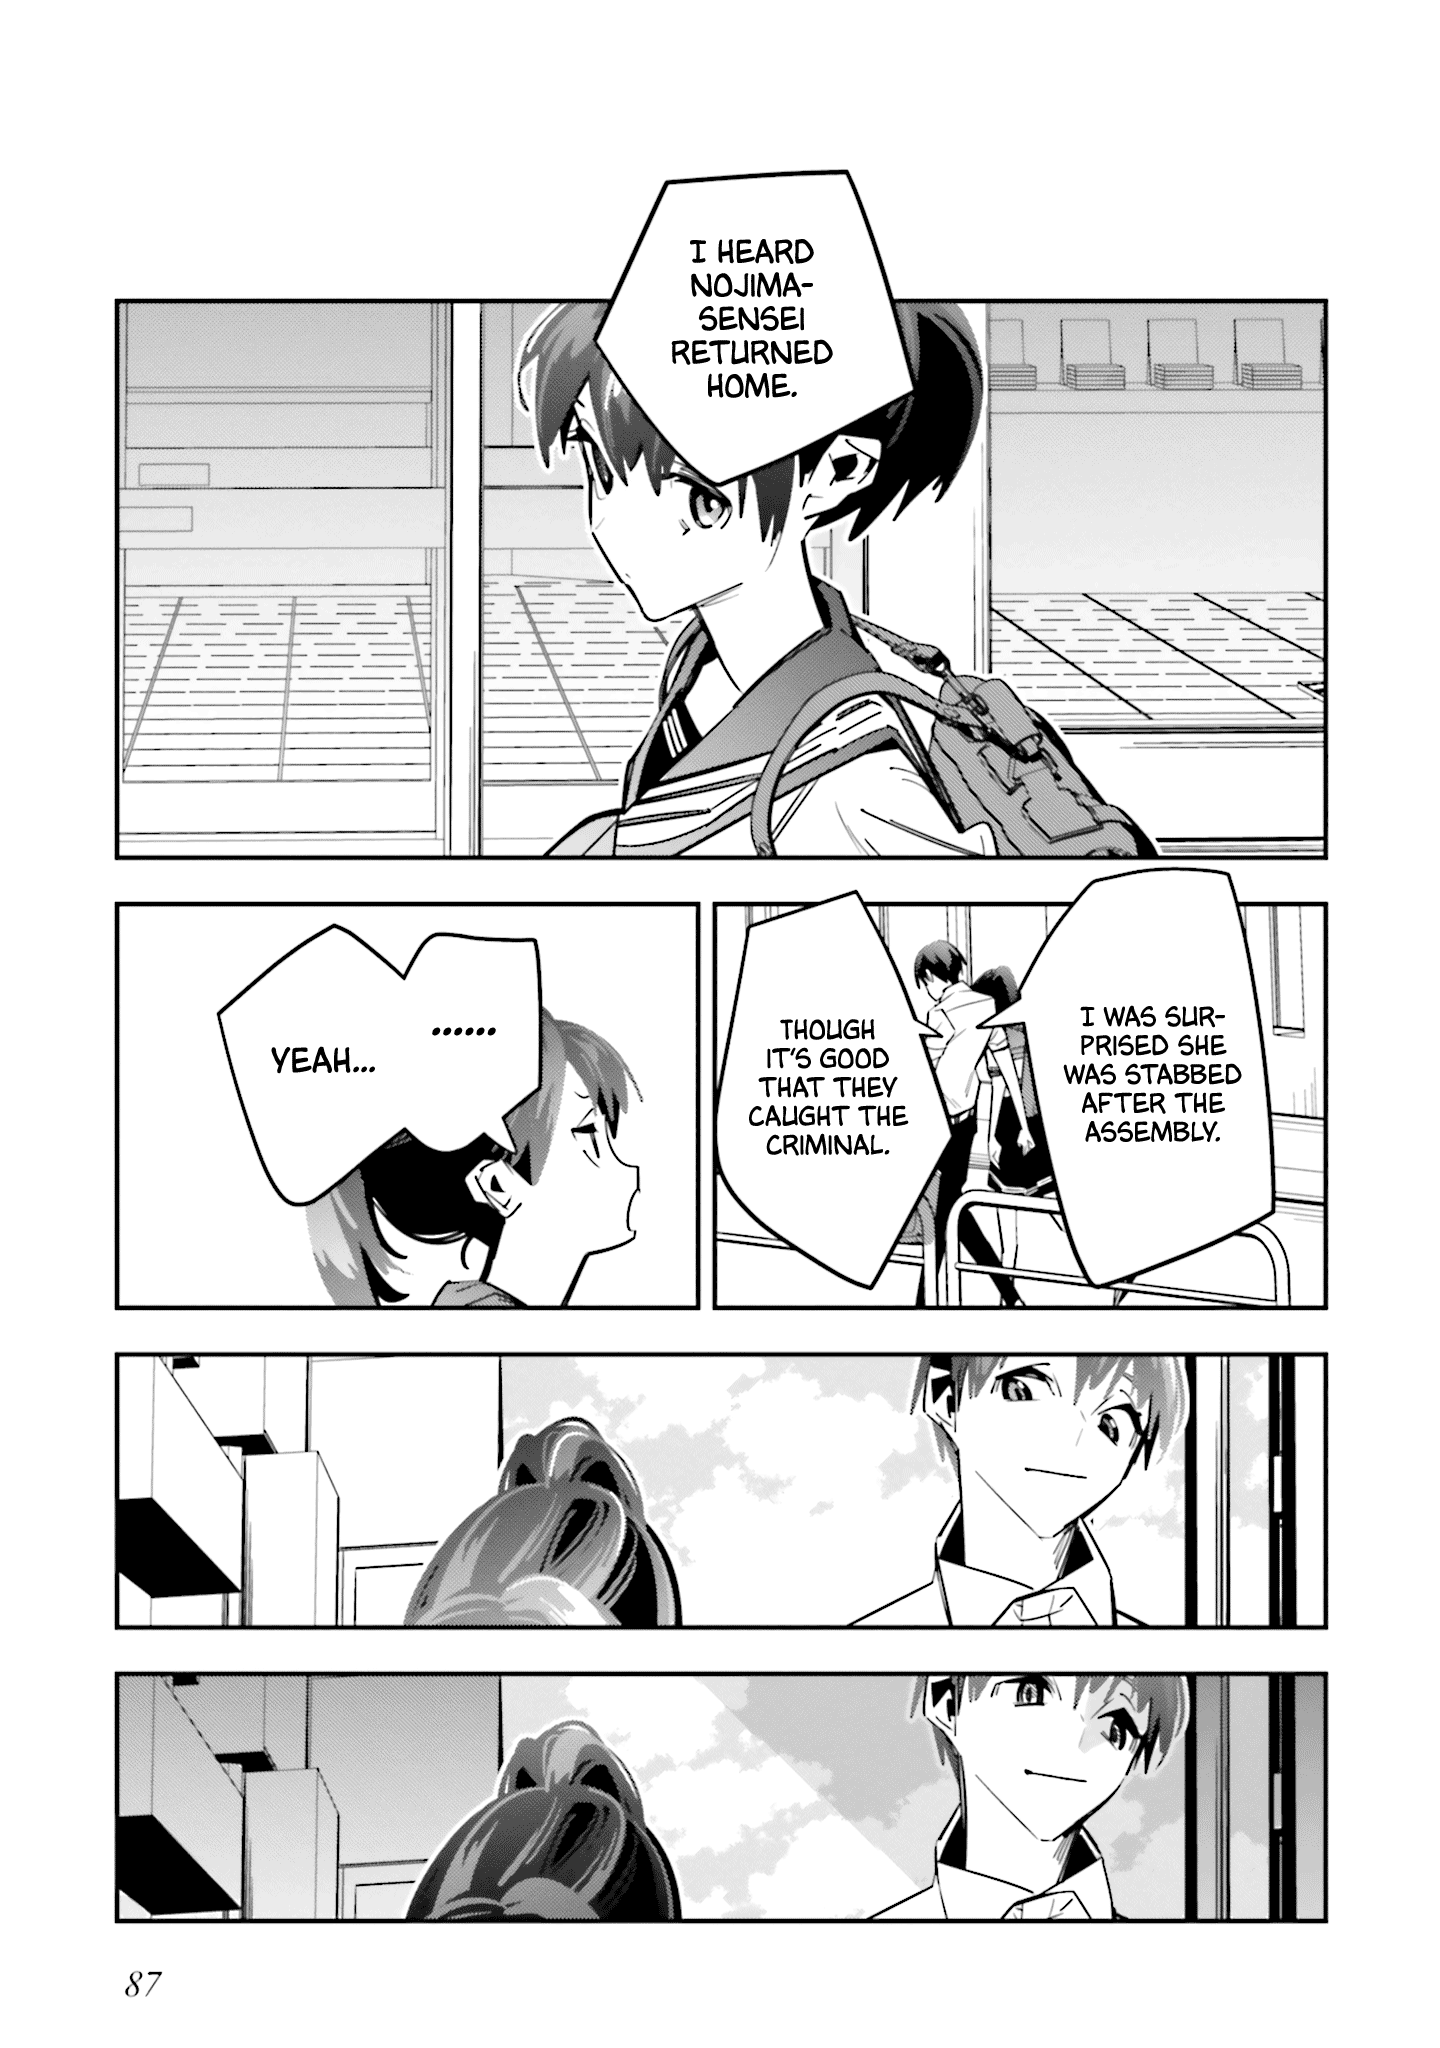 I Reincarnated As The Little Sister Of A Death Game Manga's Murder Mastermind And Failed Chapter 2 #34